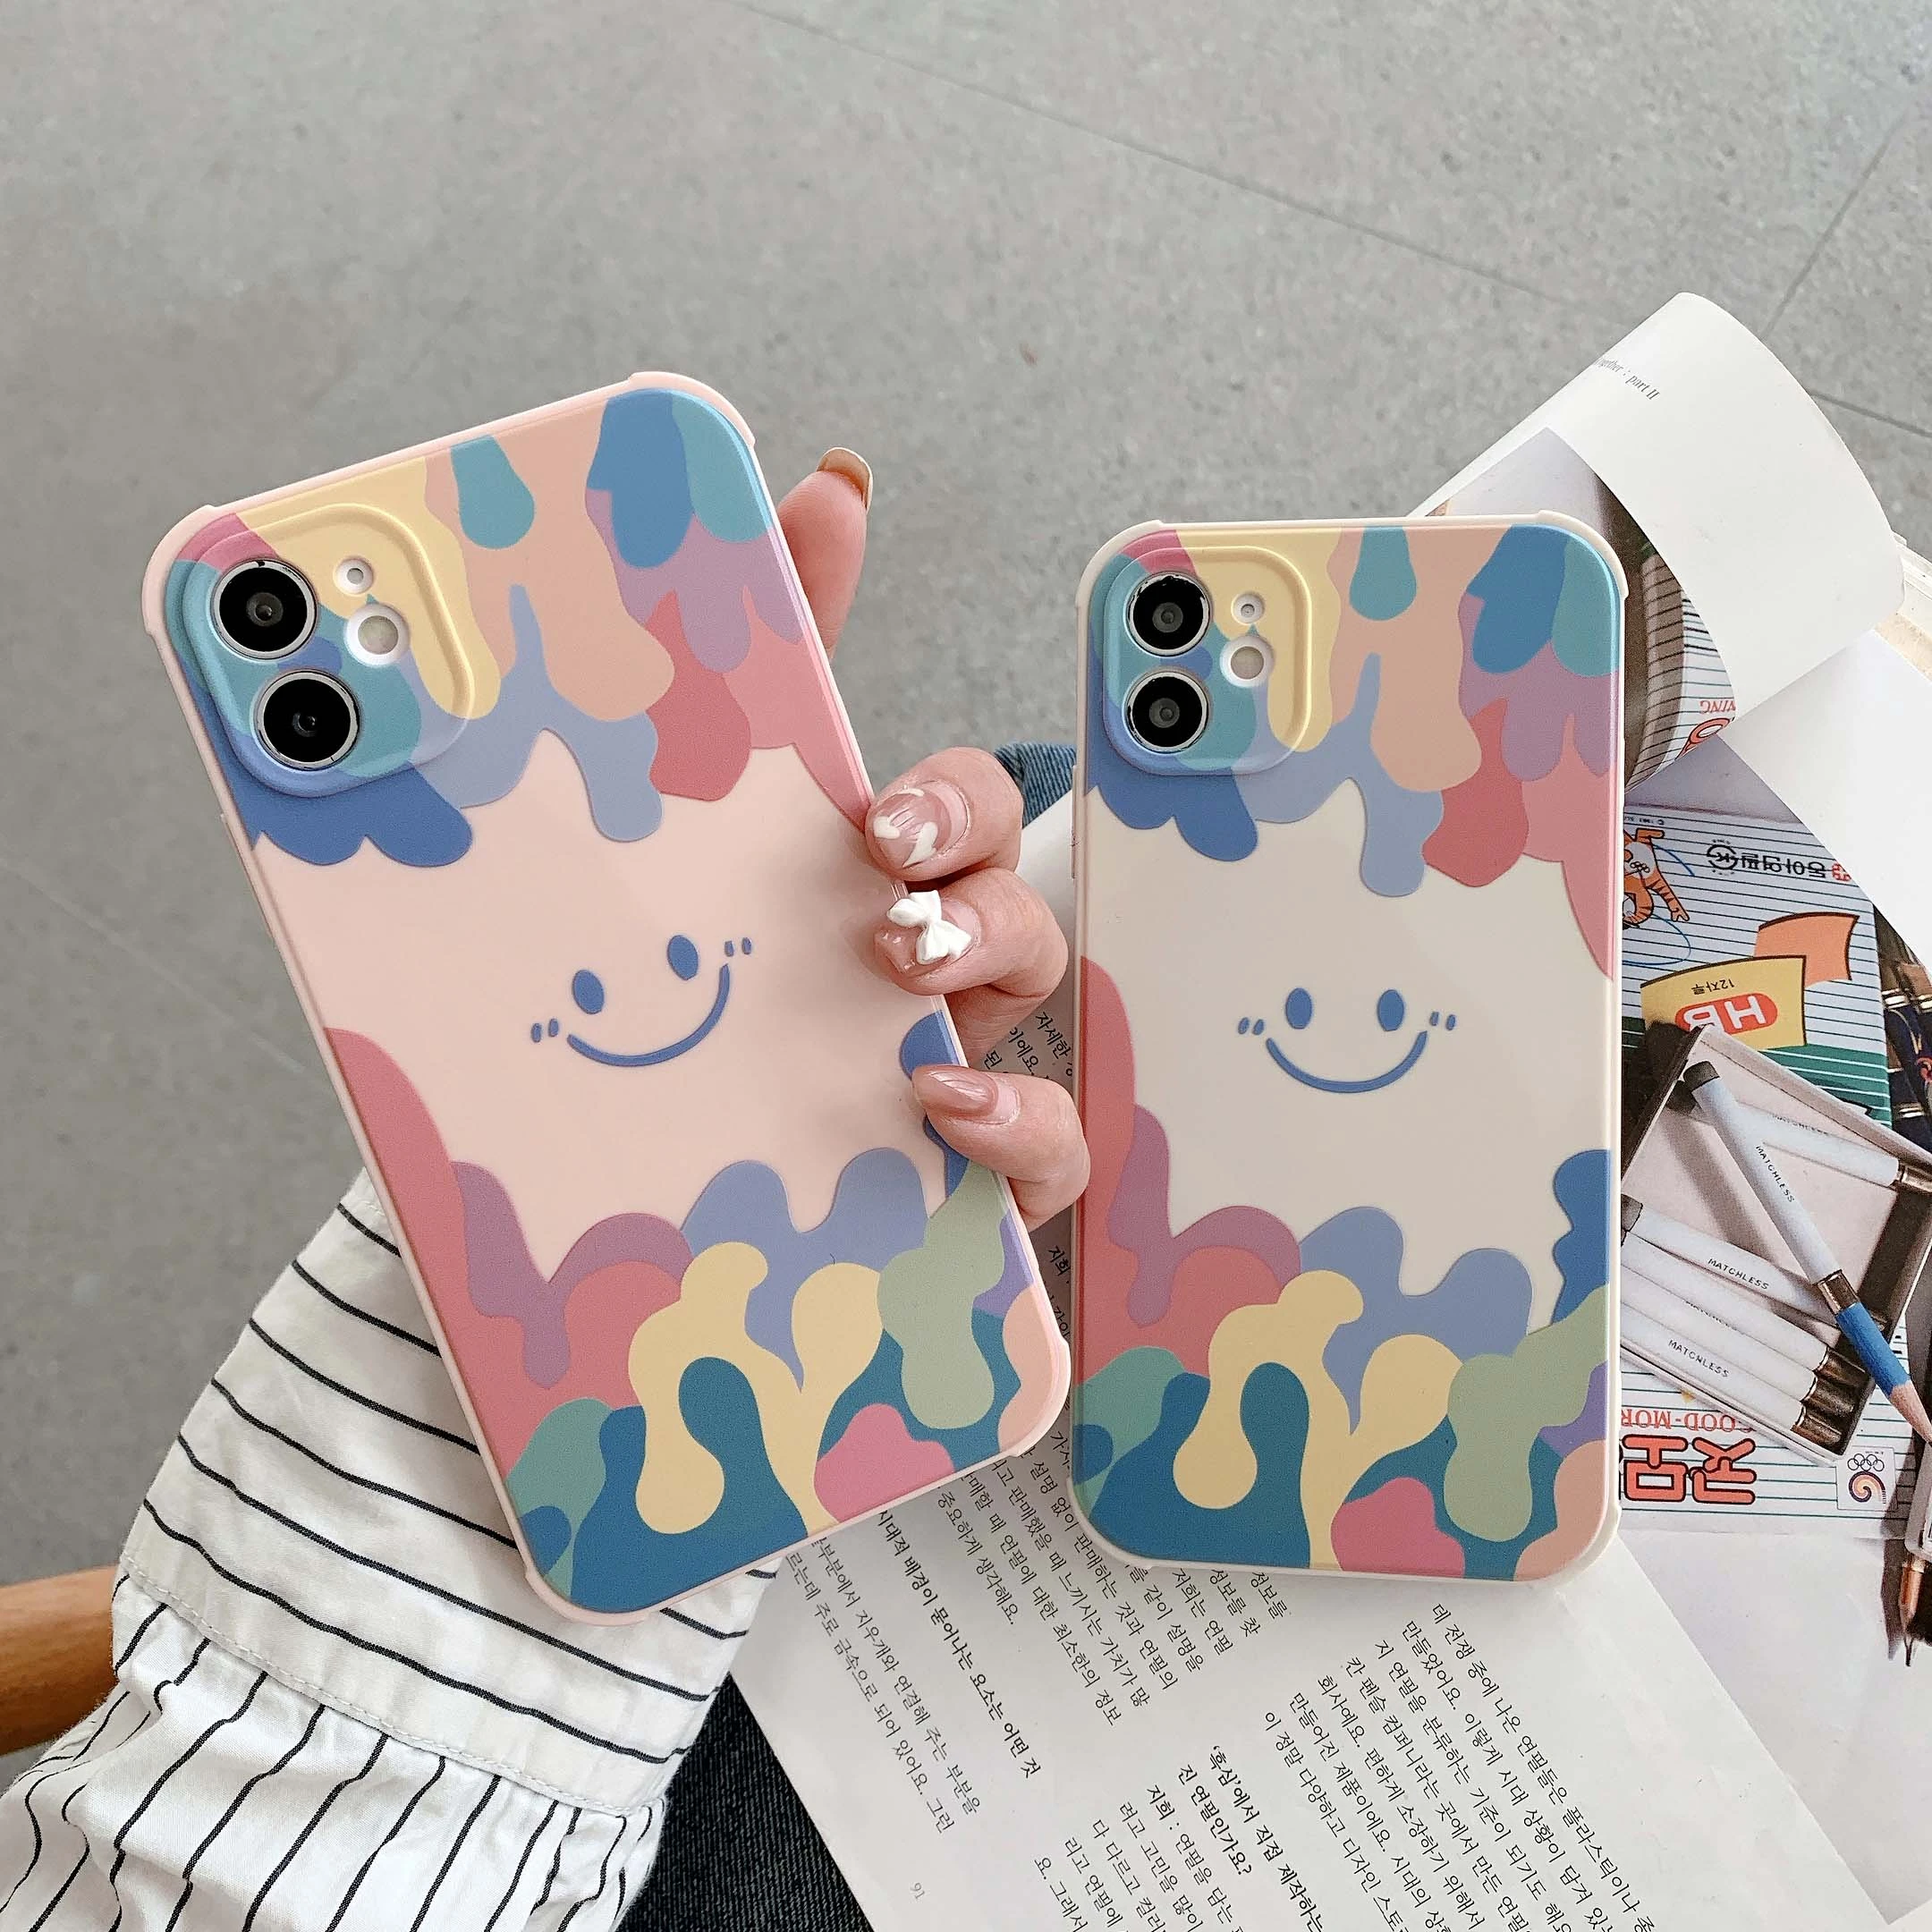 New Happy Smile Phone Cases for iPhone 11 12 13 Pro Max Mini Soft Tpu Back Cover Case for iPhone XR X XS Max 7 8 Plus Se 2020 apple iphone 12 mini  case